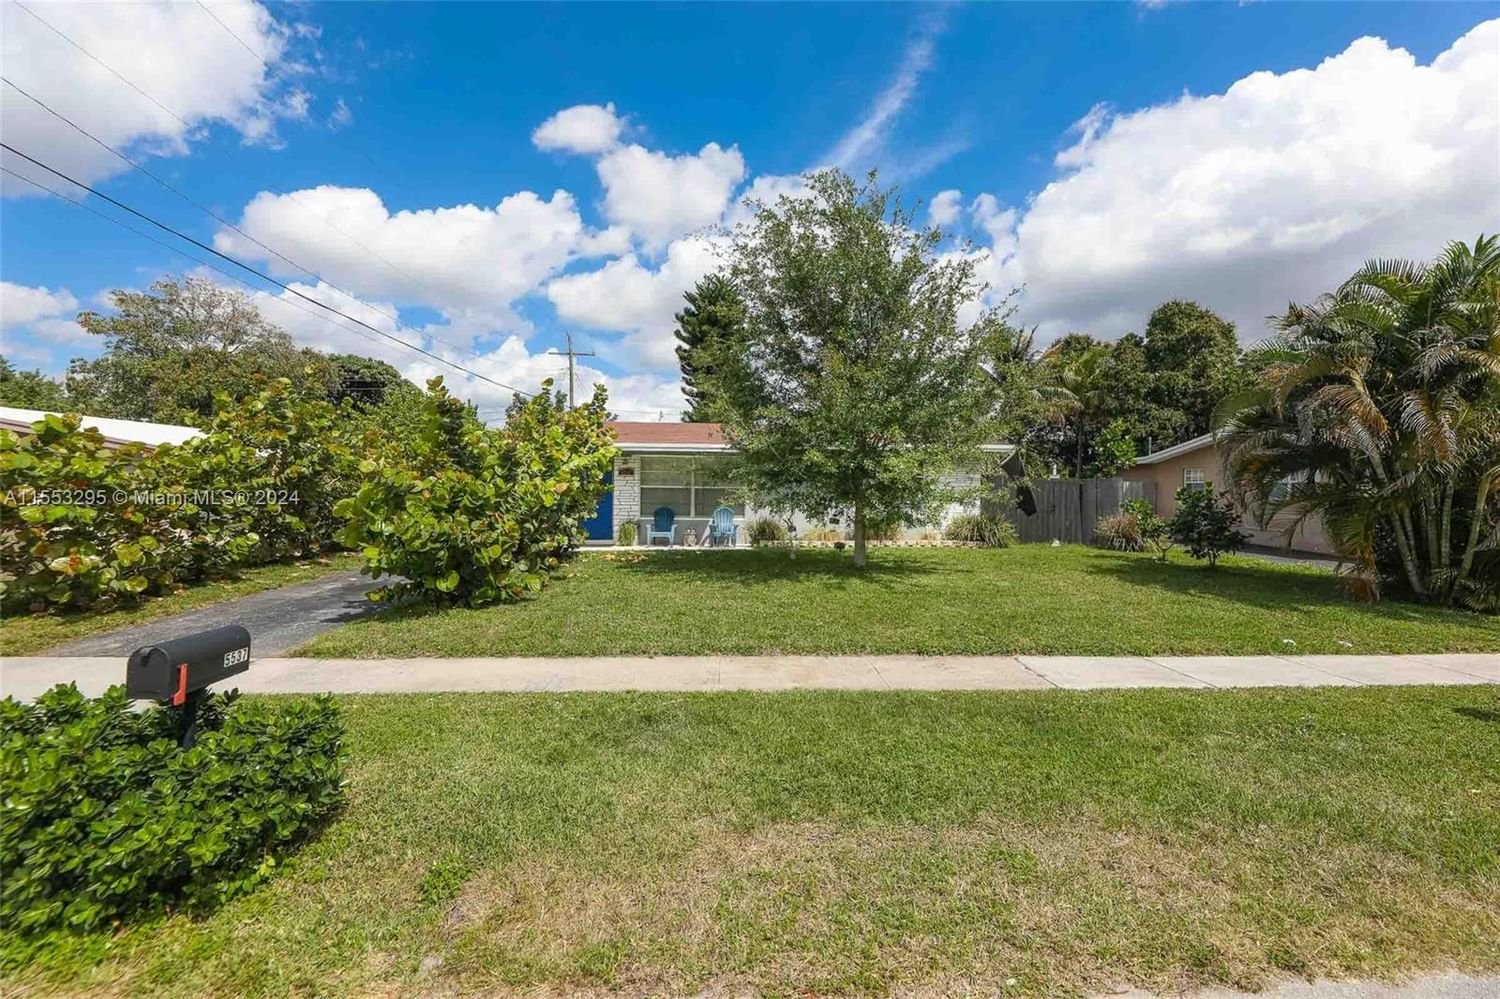 Real estate property located at 5537 6th Ct, Broward County, MARGATE ESTATES SEC 1, Margate, FL